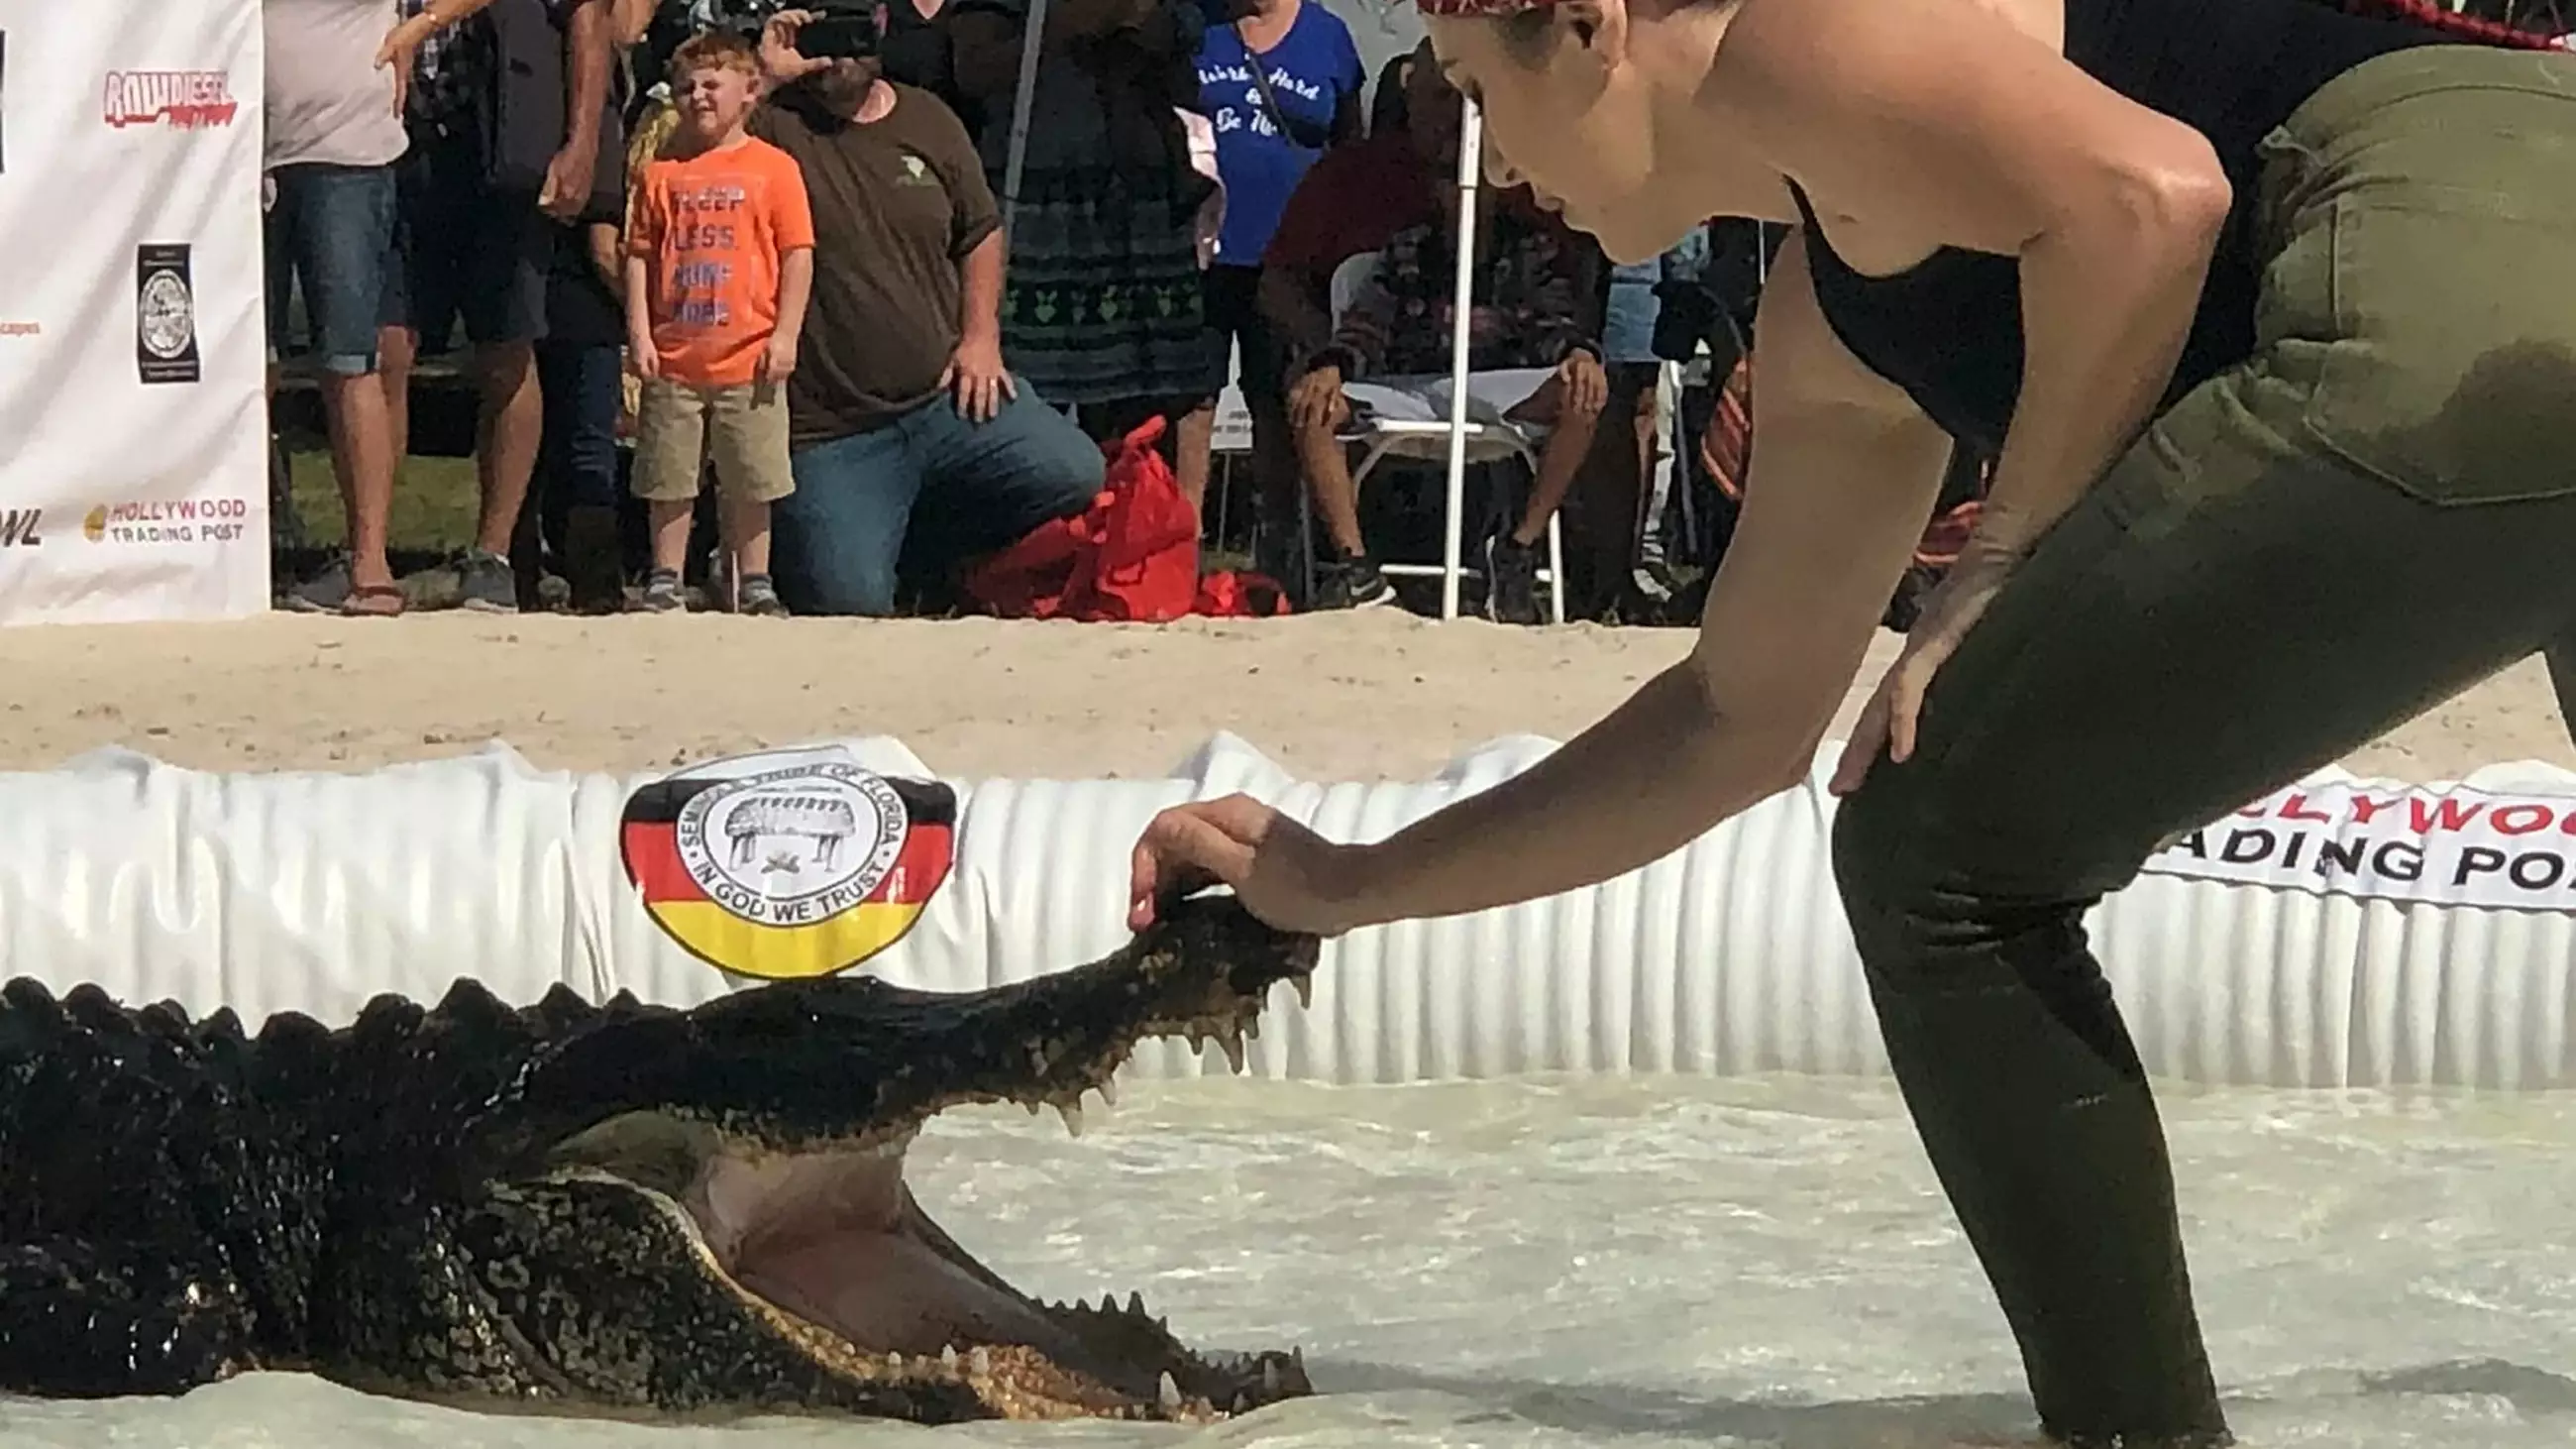 Woman Sticks Her Head Inside An Alligator's Mouth At Wrestling Competition